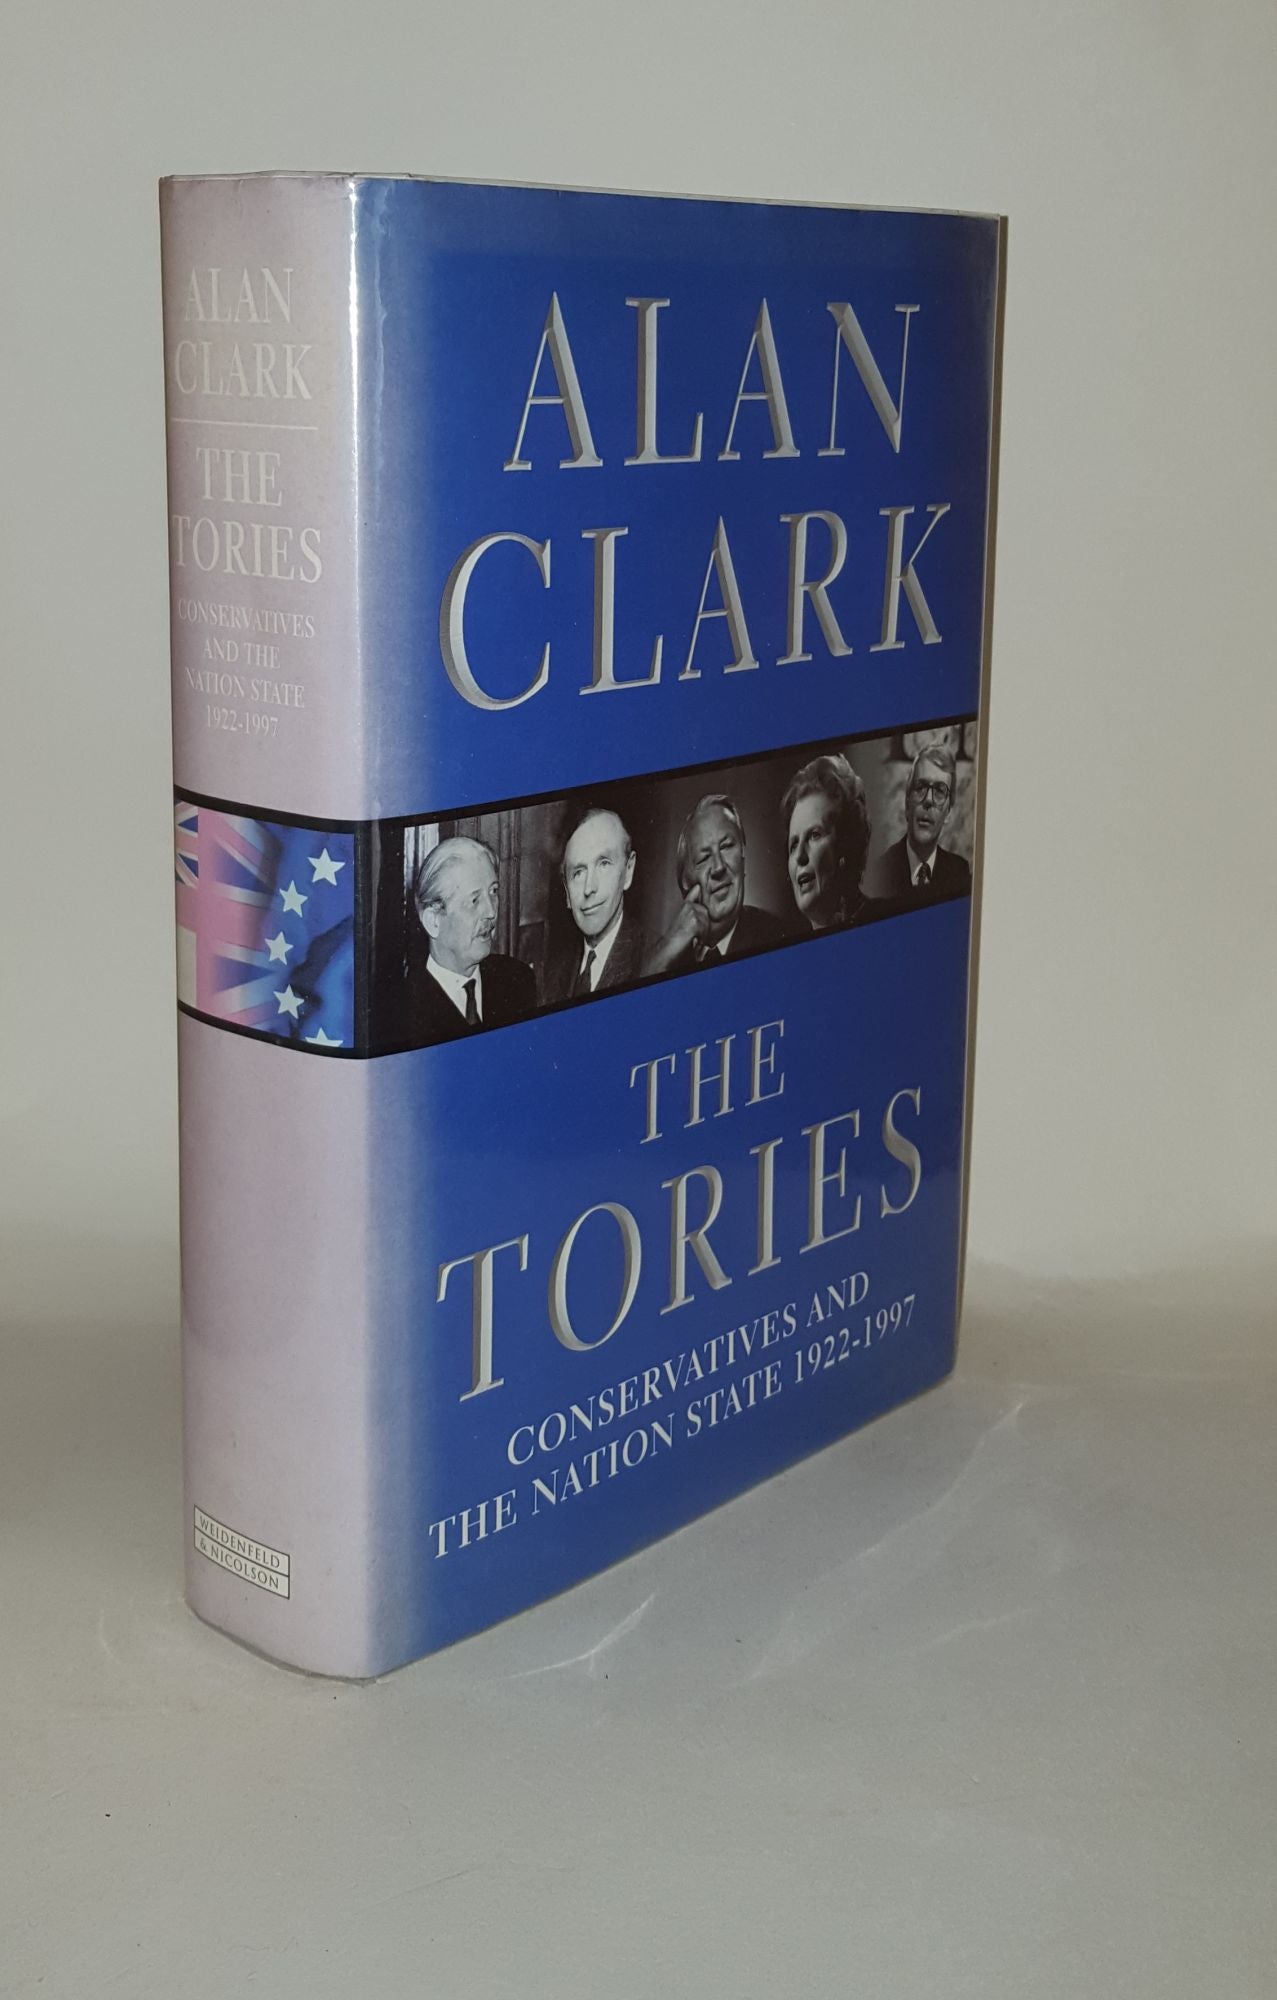 CLARK Alan - The Tories Conservatives and the Nation State 1922-1997